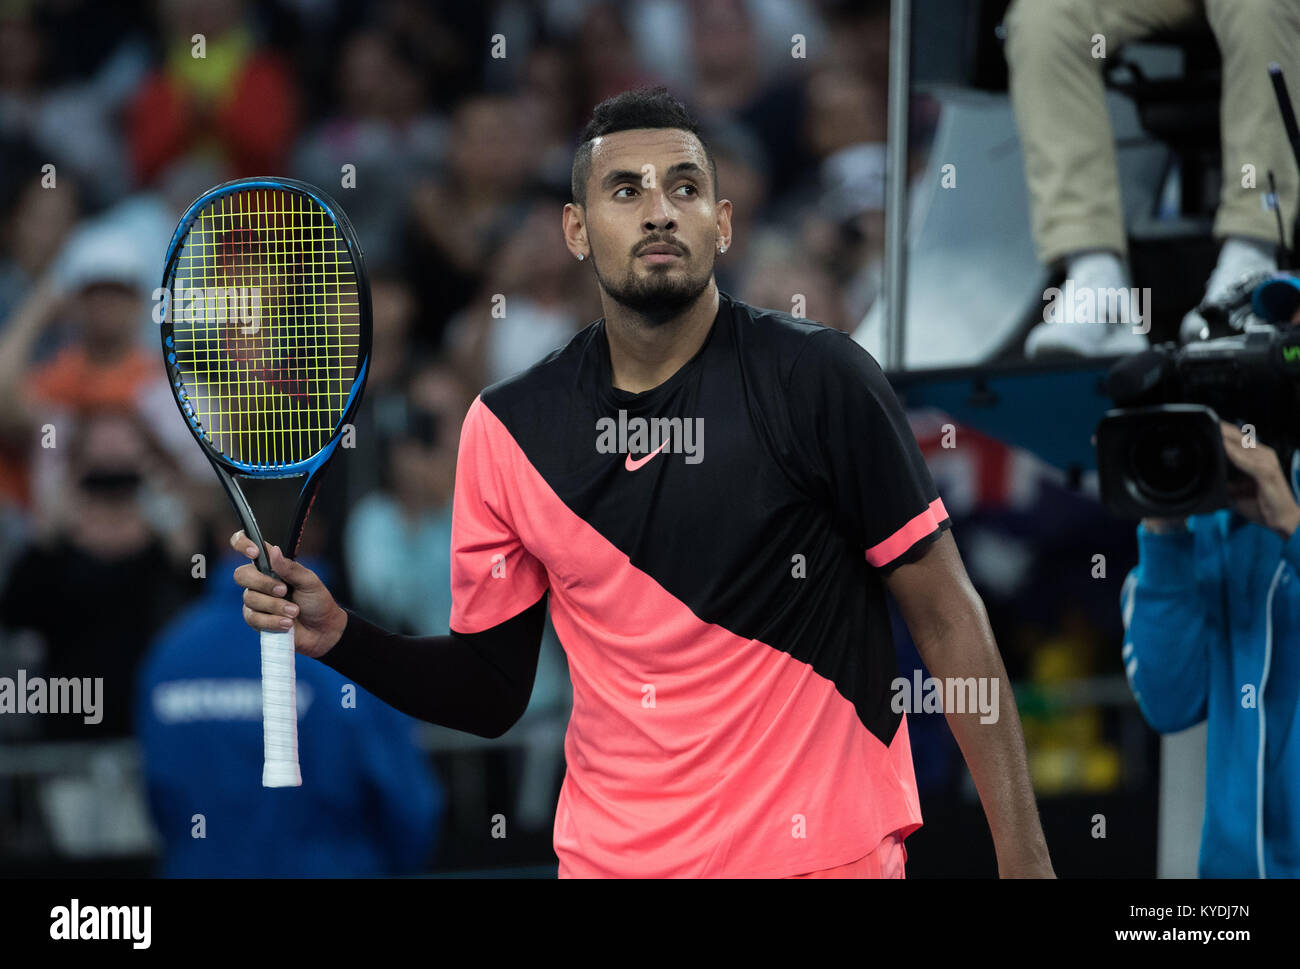 Melbourne, Australia. 15th Jan, 2018. Nick Kyrgios of Australia greets the audiences after the men's singles first round match against Rogerio Dutra Silva of Brazil at Australian Open 2018 in Melbourne, Australia, Jan. 15, 2018. Credit: Zhu Hongye/Xinhua/Alamy Live News Stock Photo